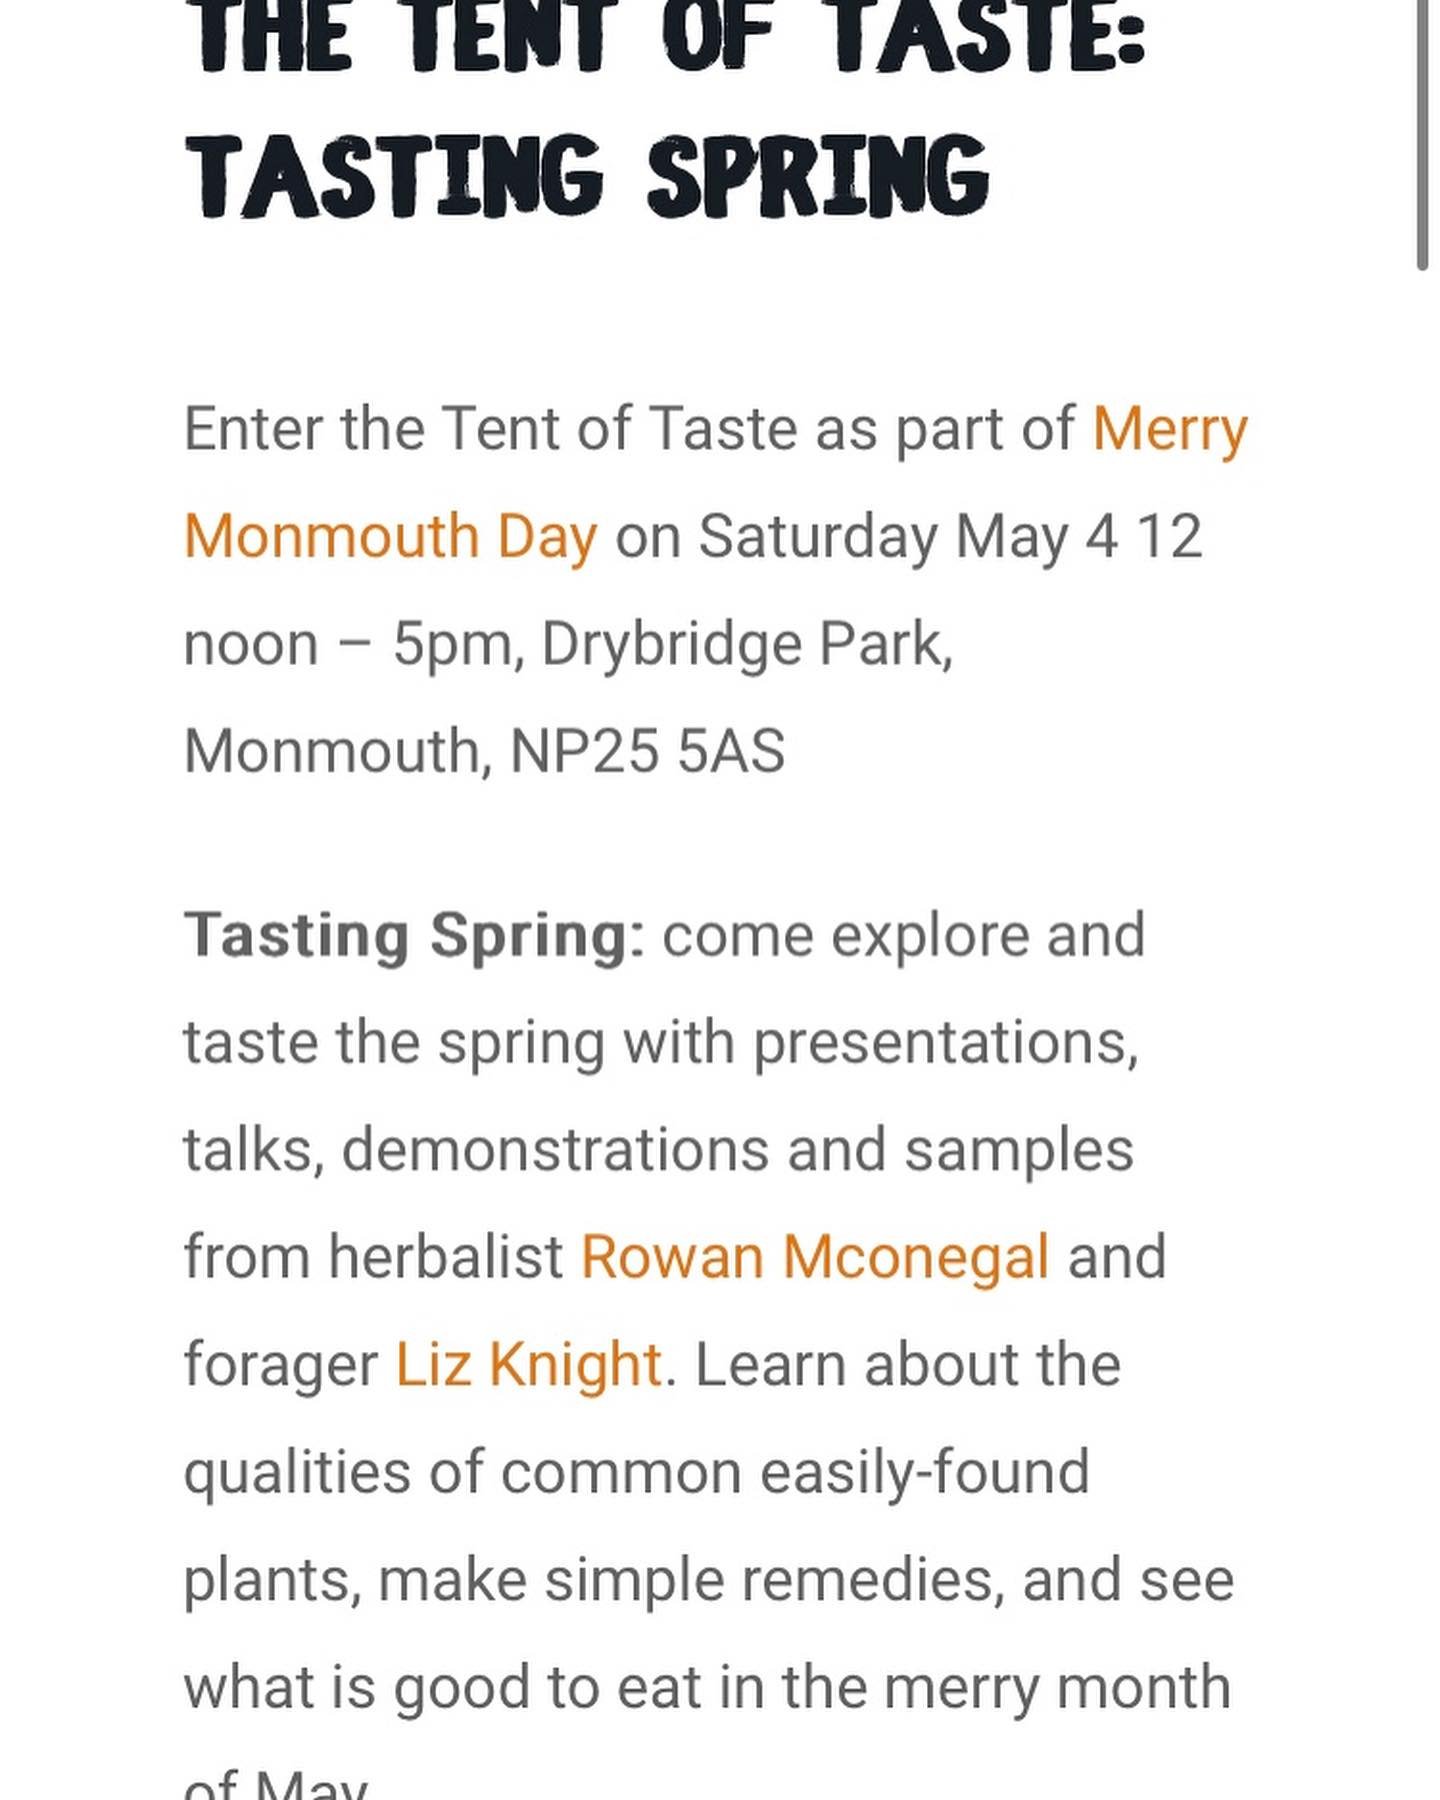 Come and taste spring at the tent if taste at the Wye Valley River Festival in Monmouth on Saturday May 4th. I&rsquo;ll be with sister plantaholic Liz Knight - come and spend some time with us and lots of delicious plants #standupforherbs #indigenous